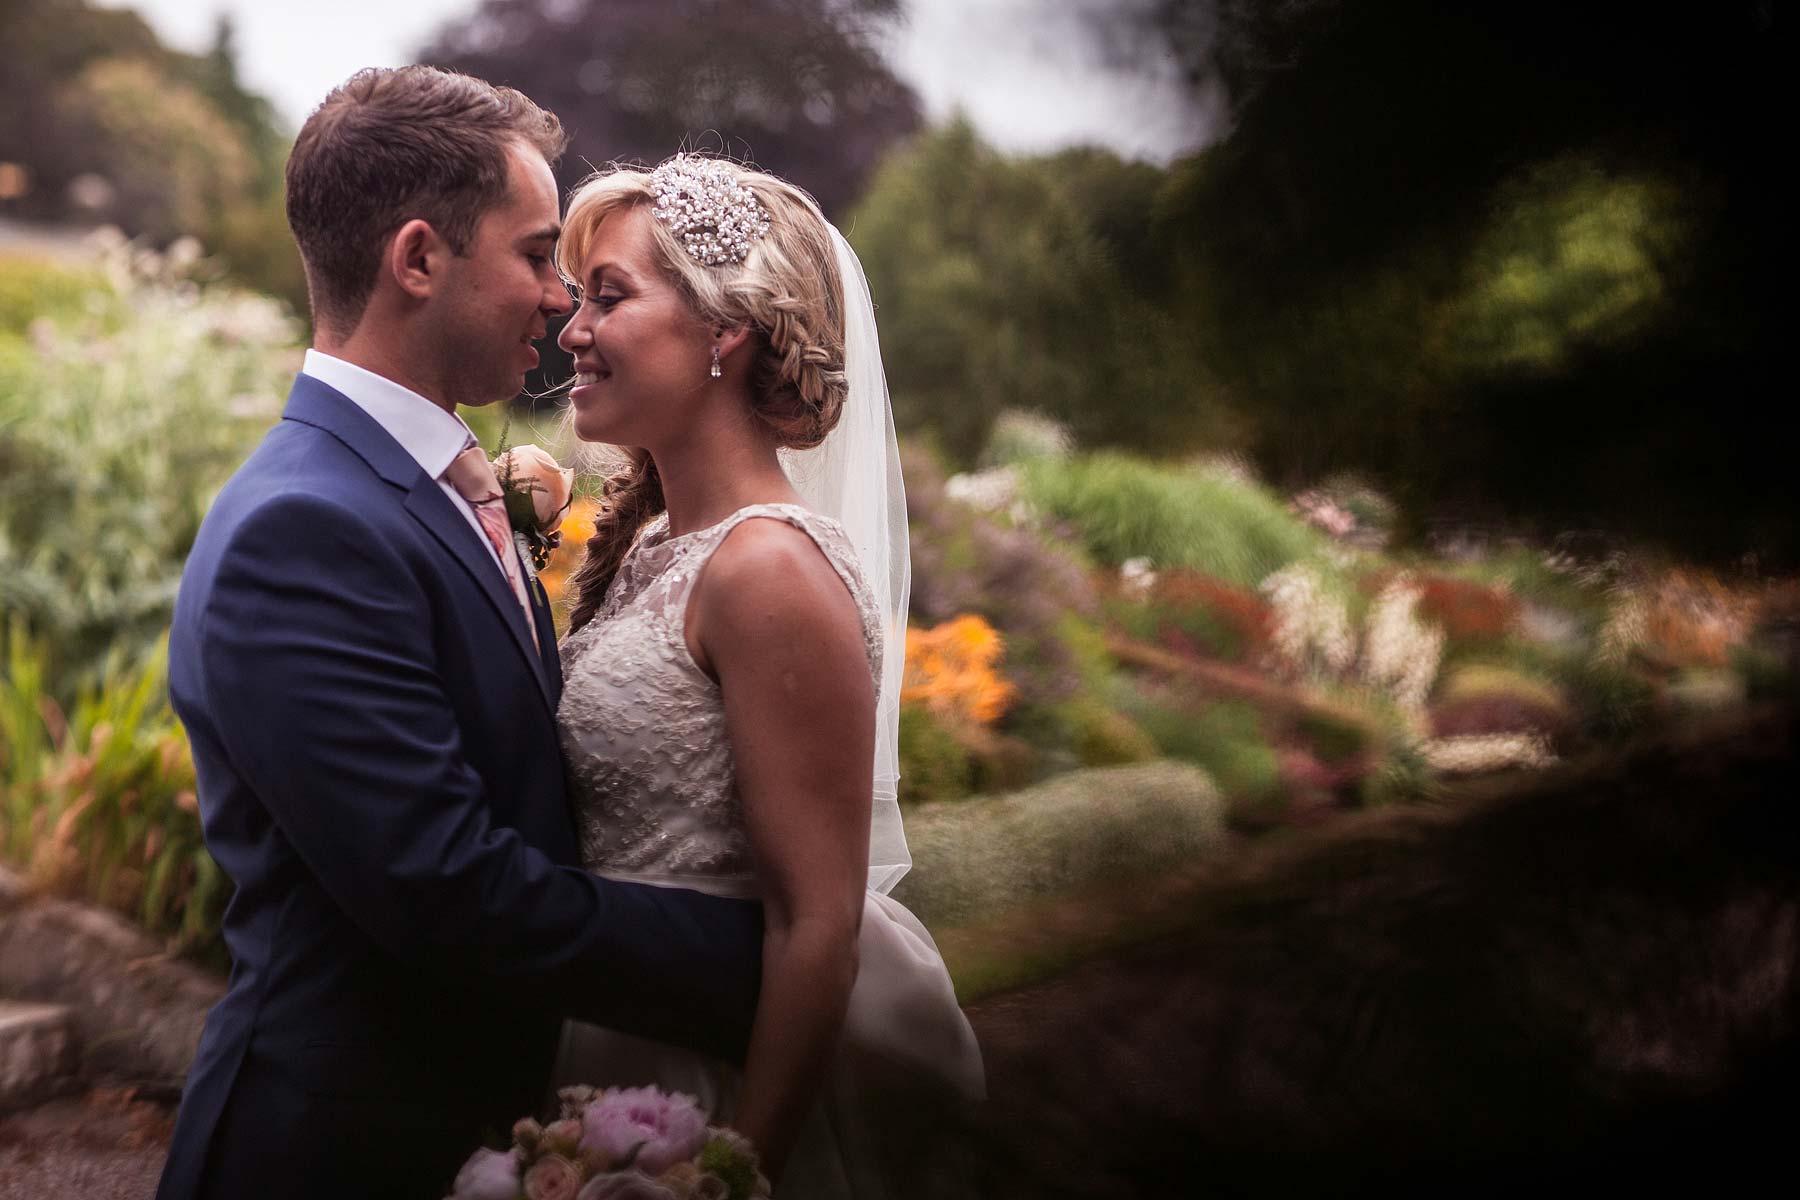 Intimate relaxed portraits of Bride and Groom at Weston Park in Staffordshire by Documentary Wedding Photographer Stuart James